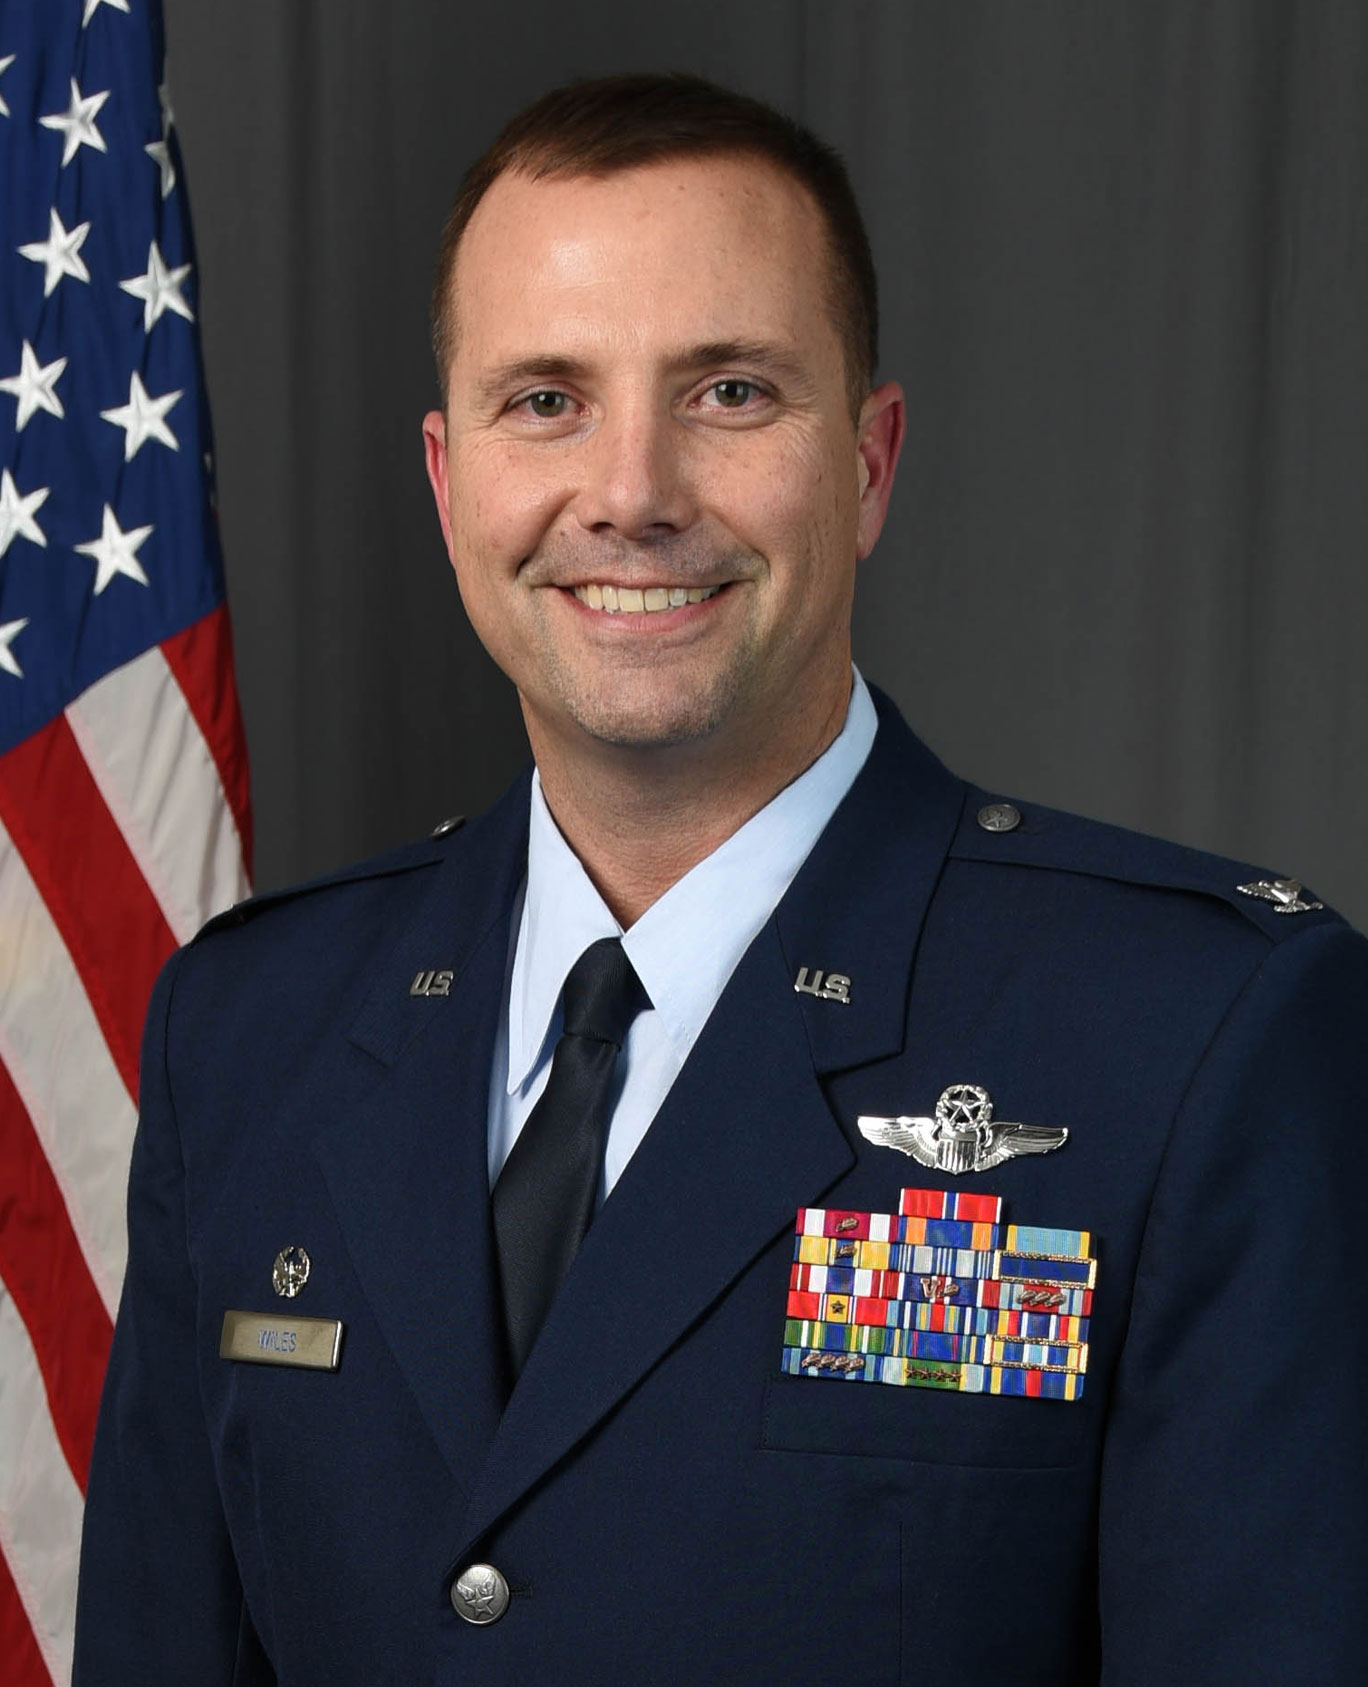 An image of Colonel Todd A. Wiles